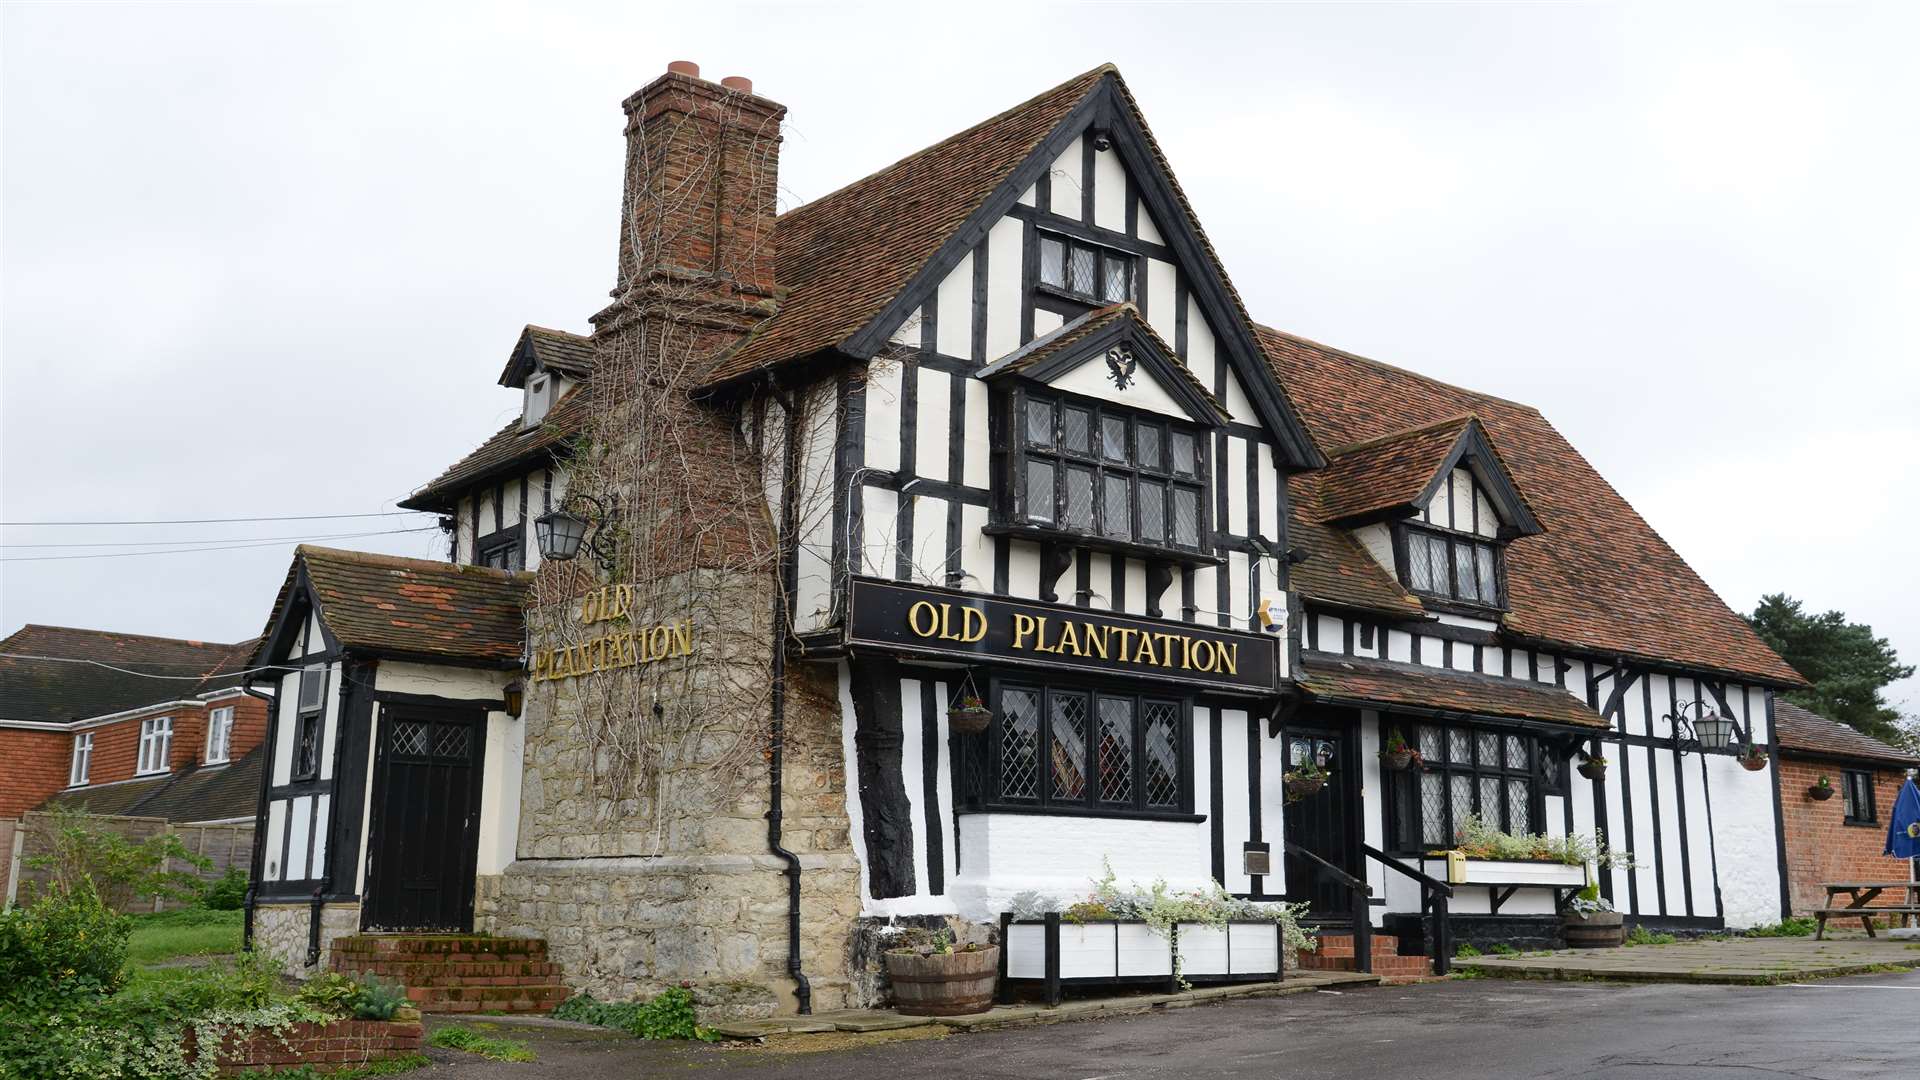 The Old Plantation pub in Bearsted. Picture: Gary Browne